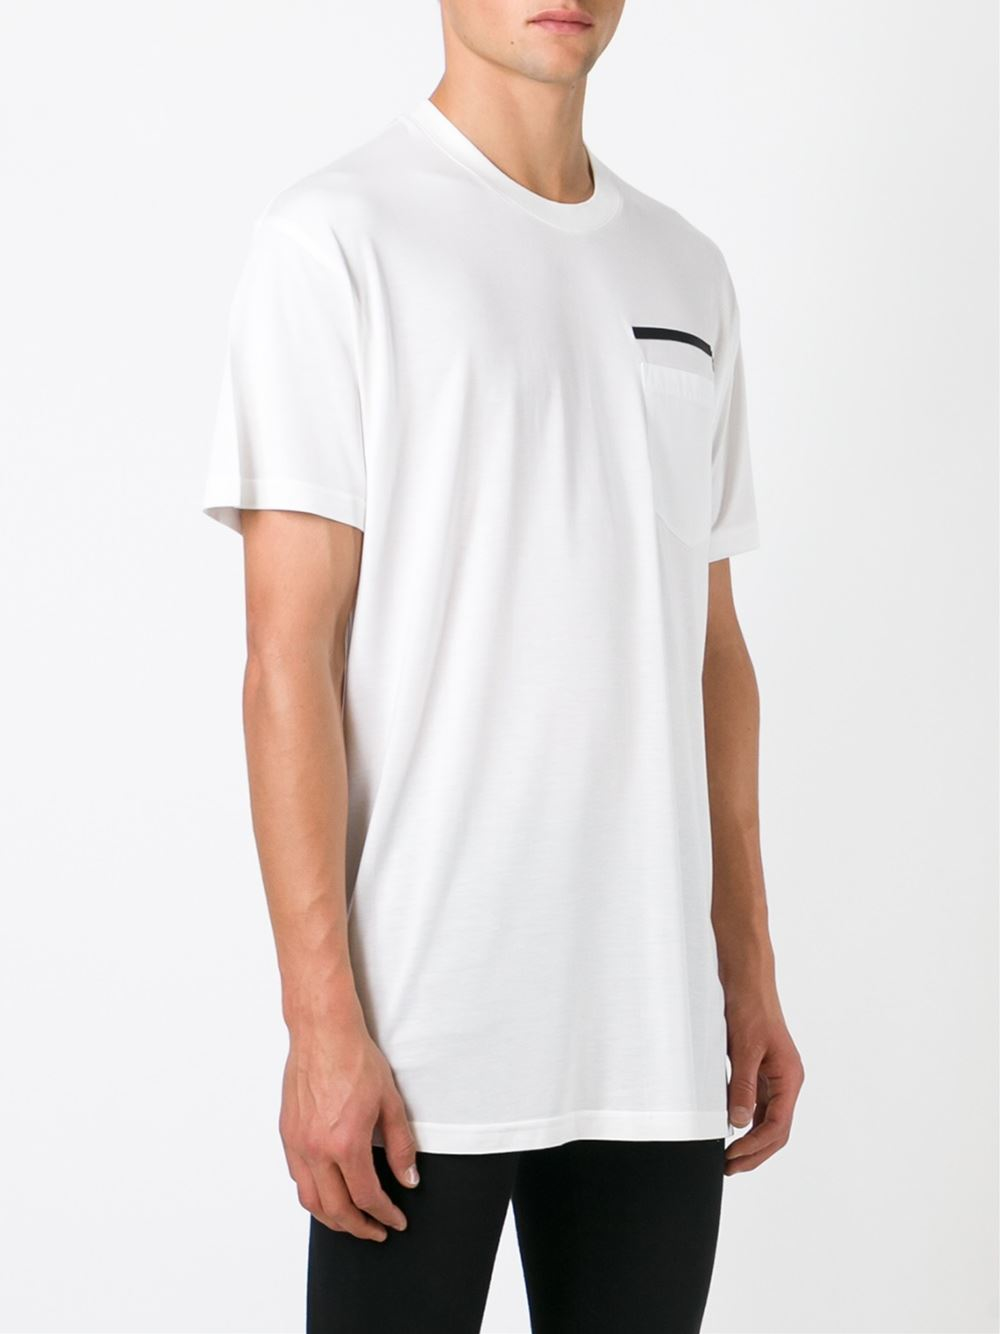 Givenchy Appliqué Shooting Star T-Shirt in White for Men | Lyst